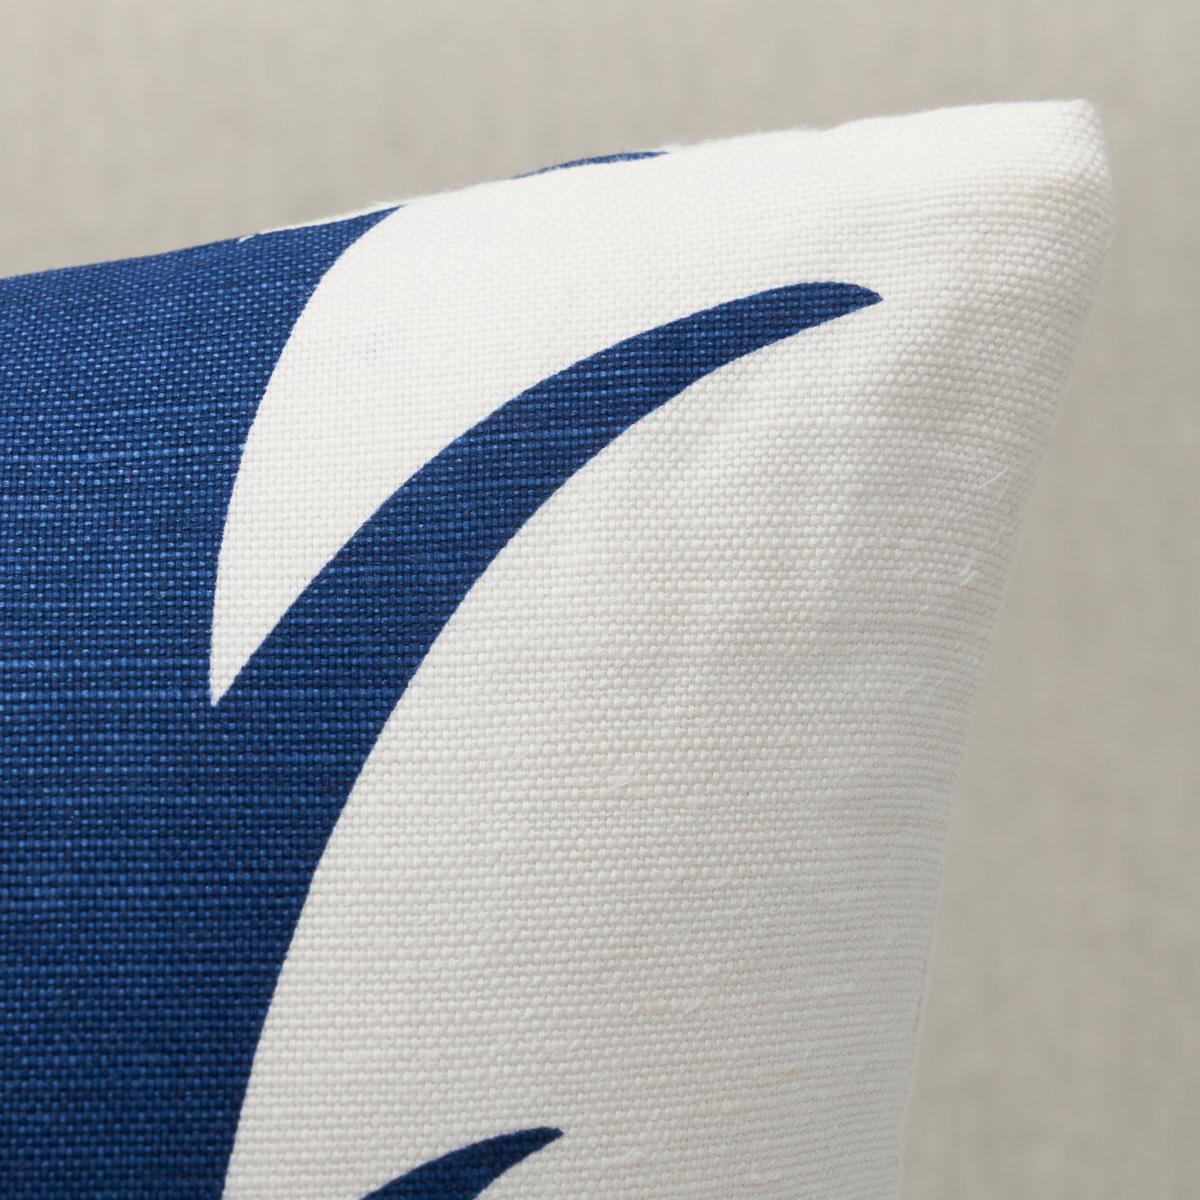 This pillow features Acanthus Stripe by Celerie Kemble for Schumacher with a knife edge finish. This pattern is a stylized stripe based on a classic acanthus motif. Elegant and airy, Acanthus Stripe in navy is also incredibly easy to use. Pillow